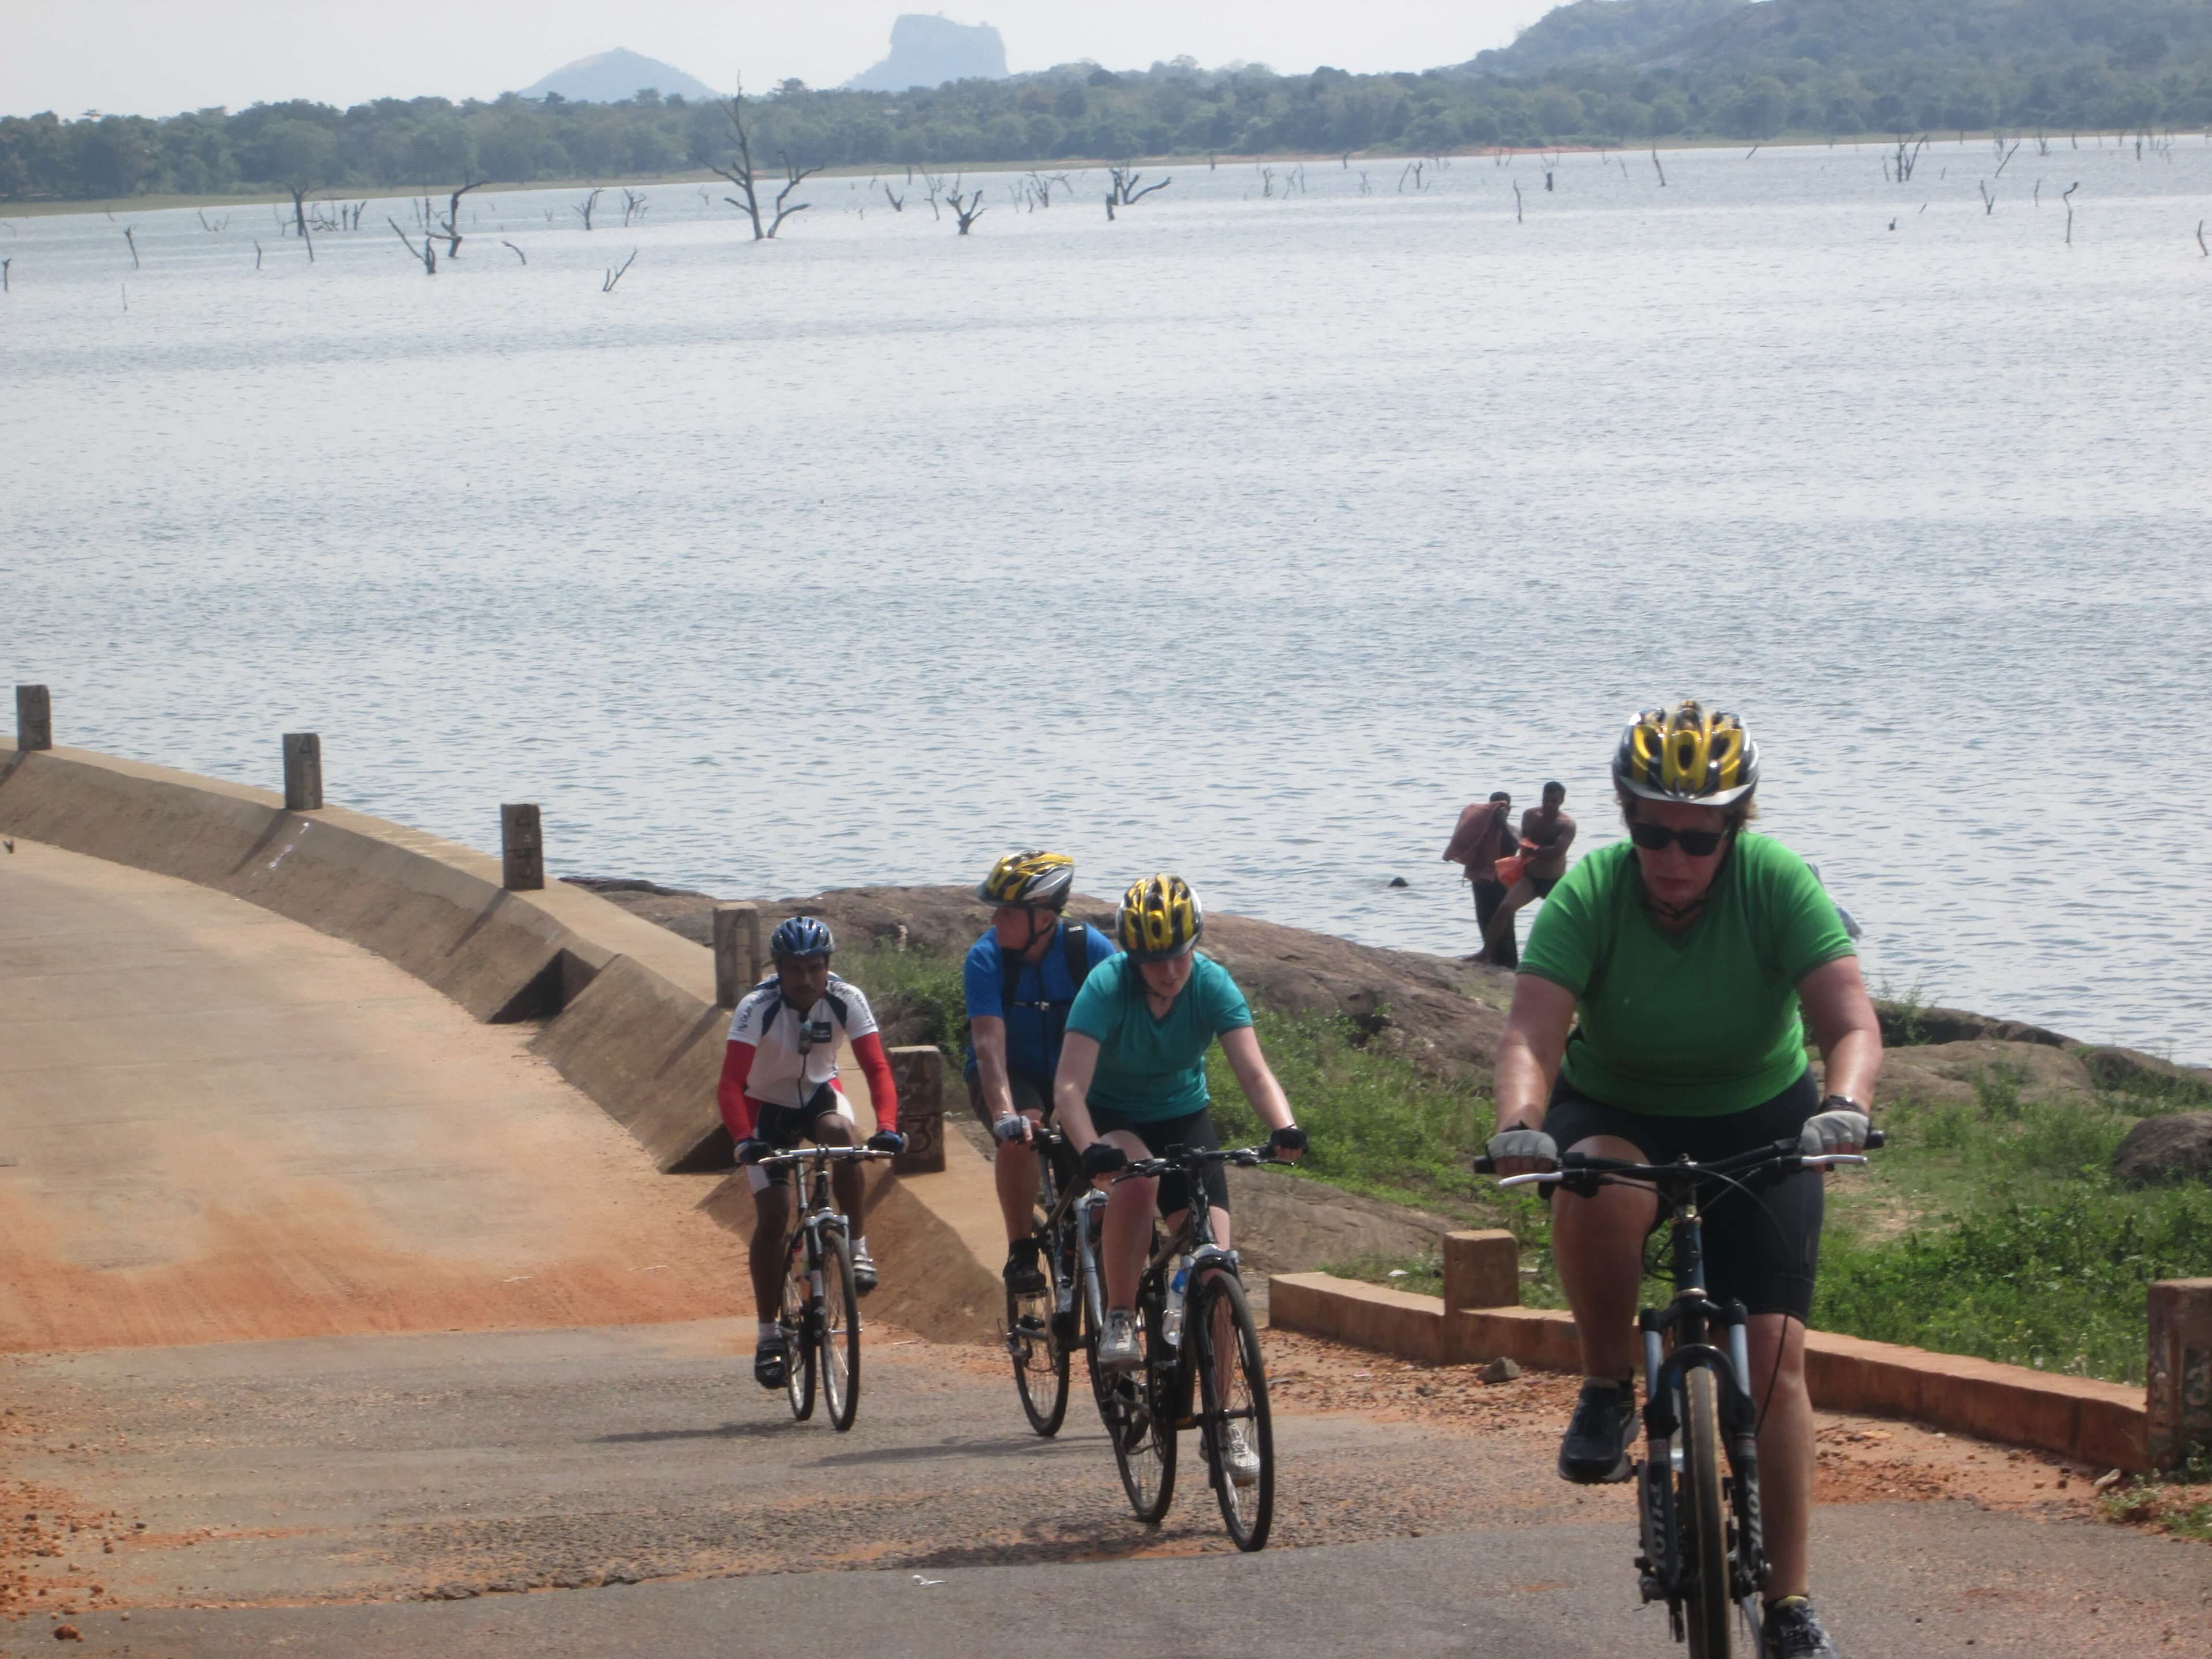 A group of cyclists following the trail with the guide during the tour Kandy, Sri Lanka.